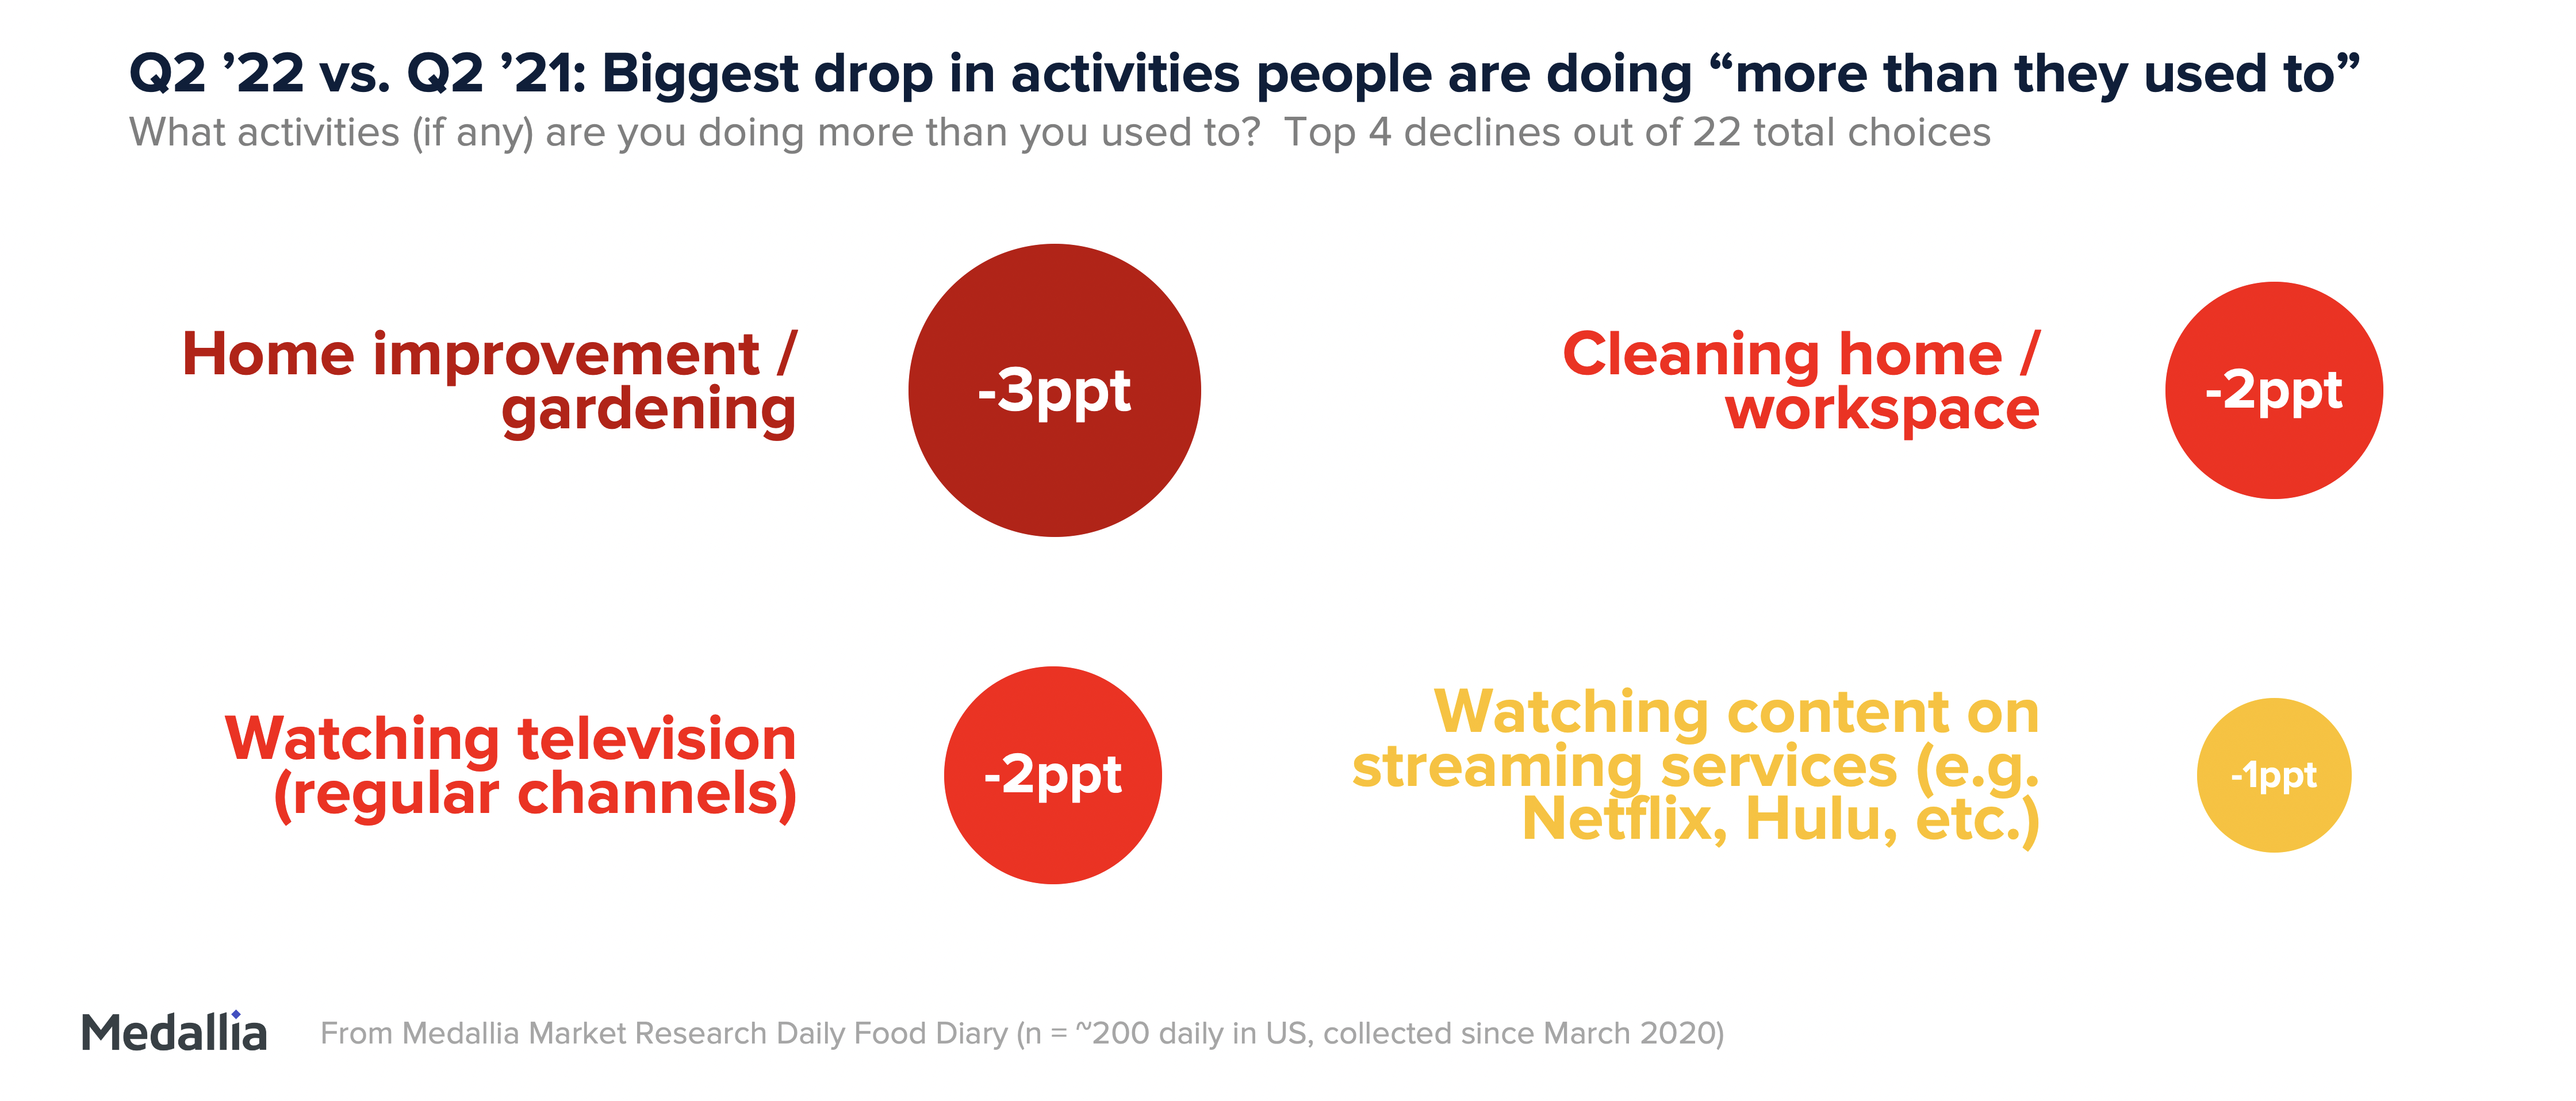 Q2 2022 vs Q2 2021: Biggest drop in activities people are doing “more than they used to”: home improvement / gardening down 3ppt, watching TV down 2ppt, cleaning home or workspace down 2 ppt, and watching streaming services down 1ppt